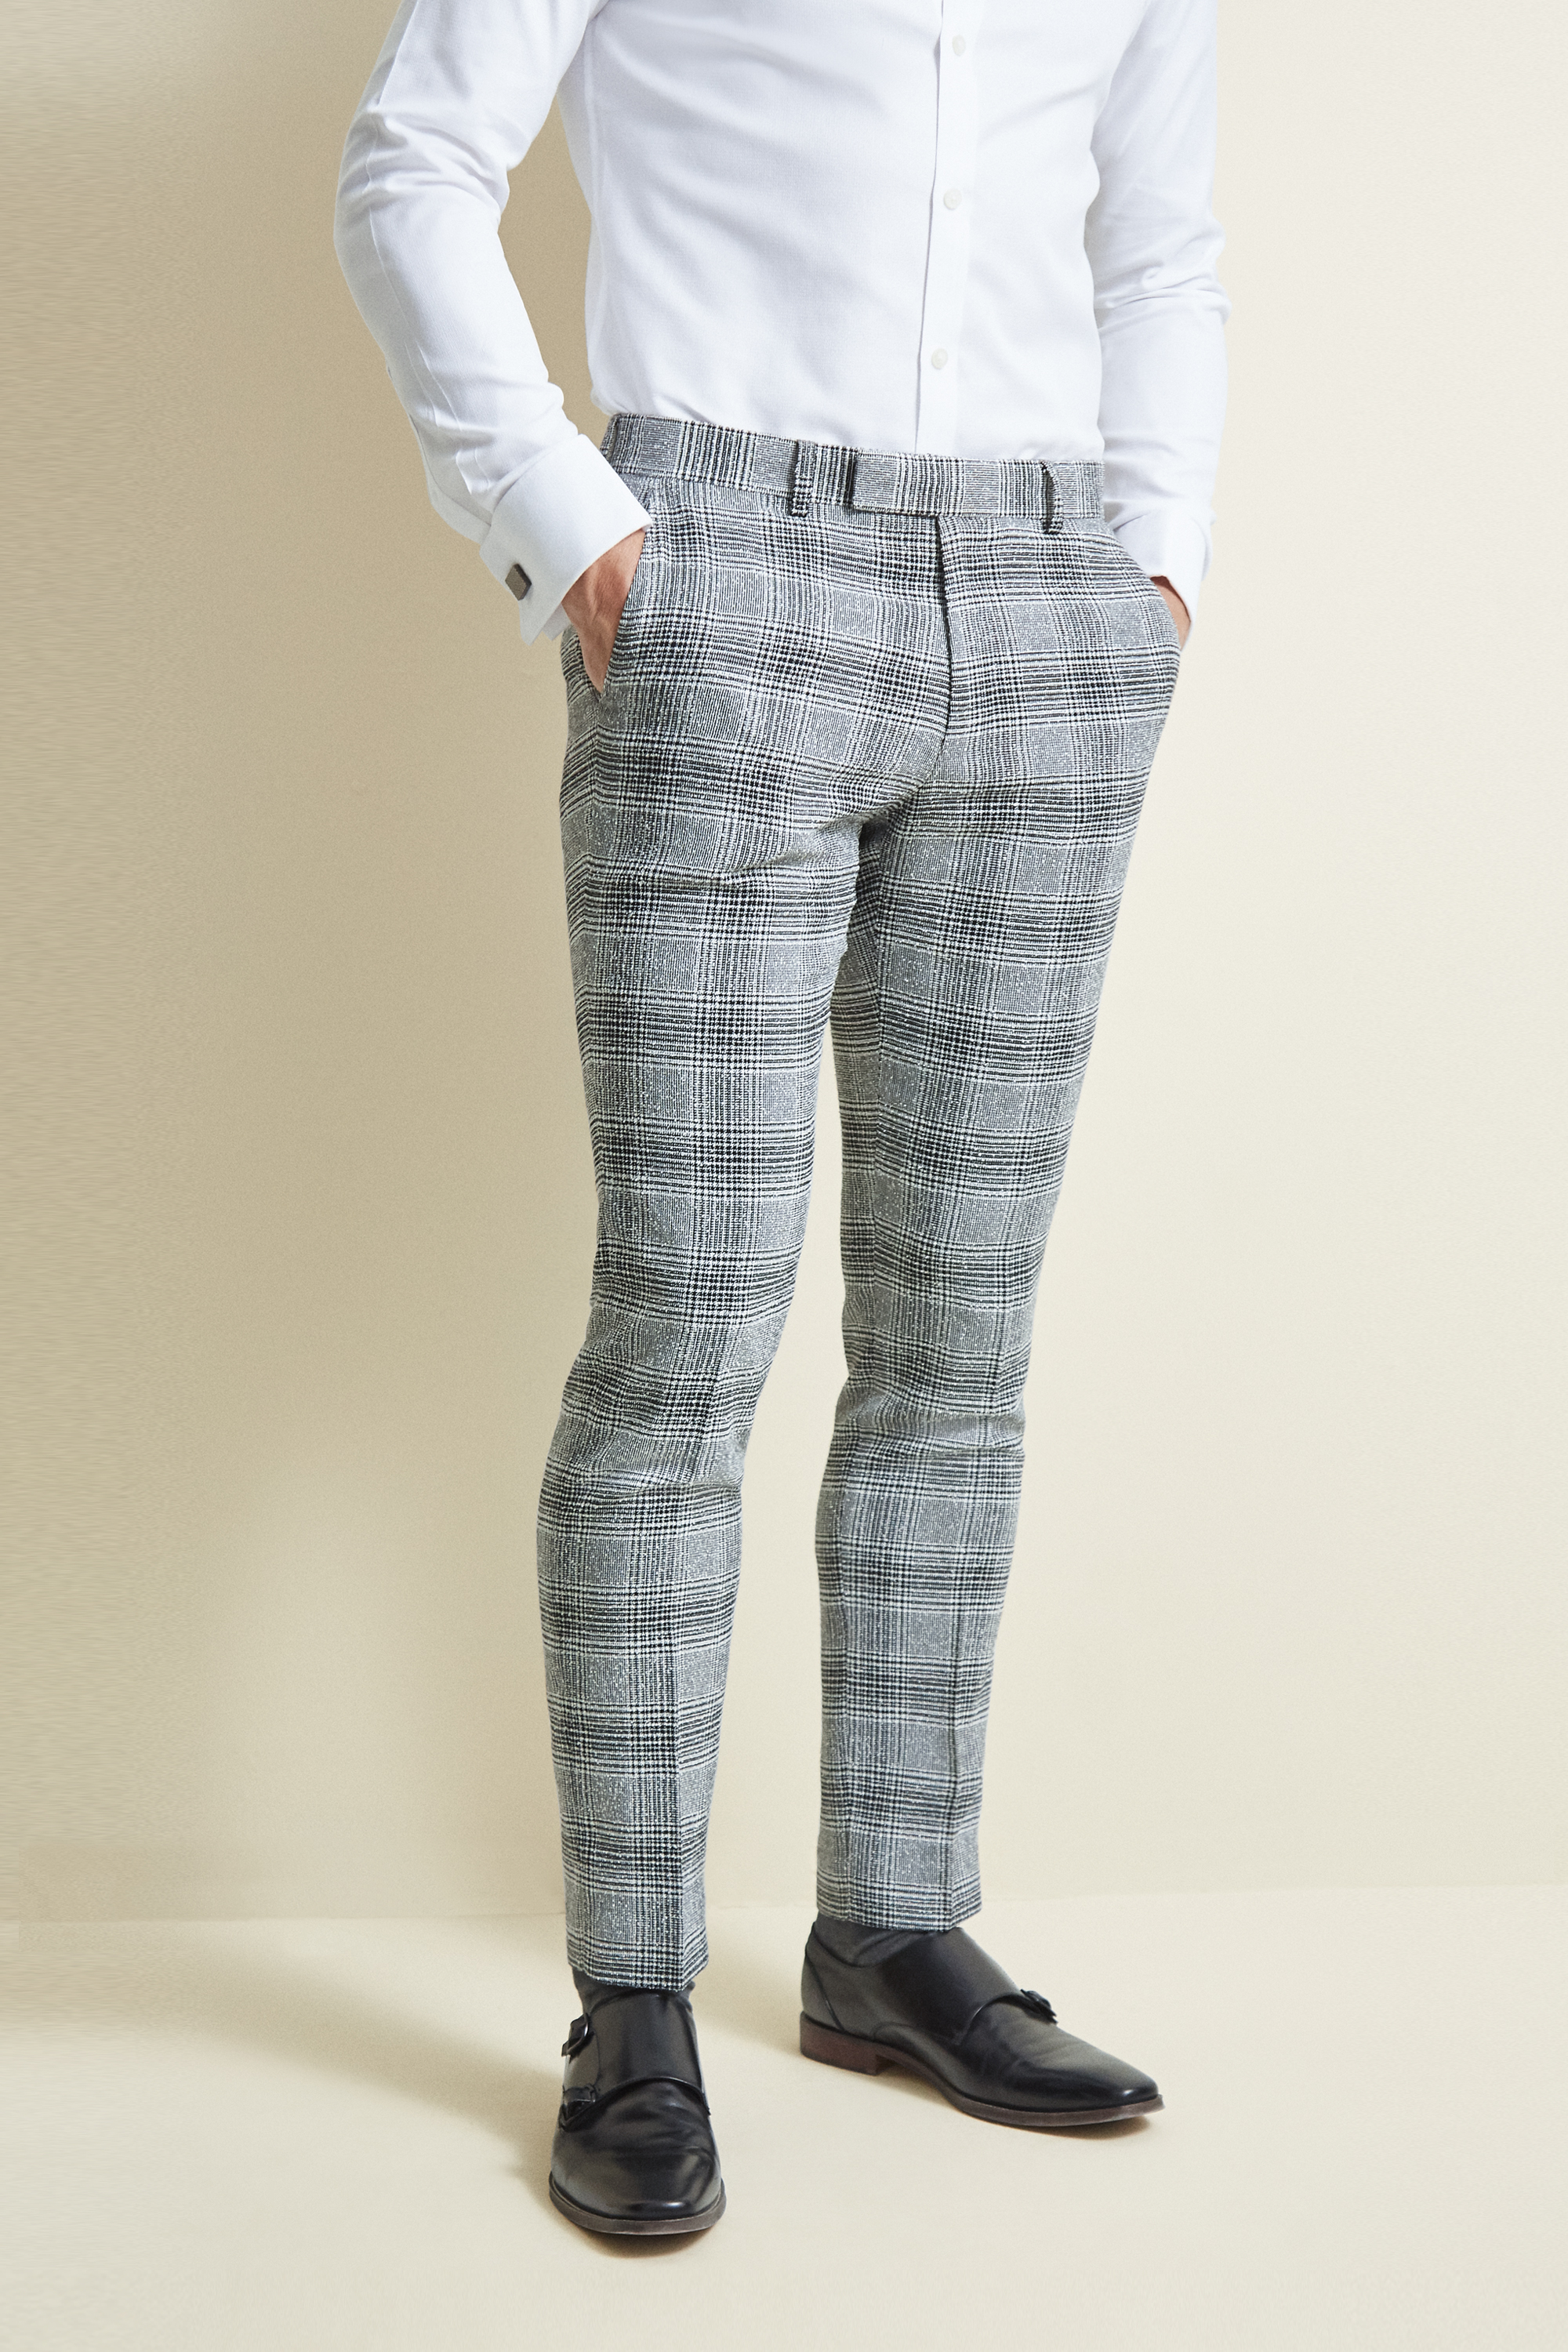 Tailored Fit Grey Blue Check Trousers | teachingcare.com